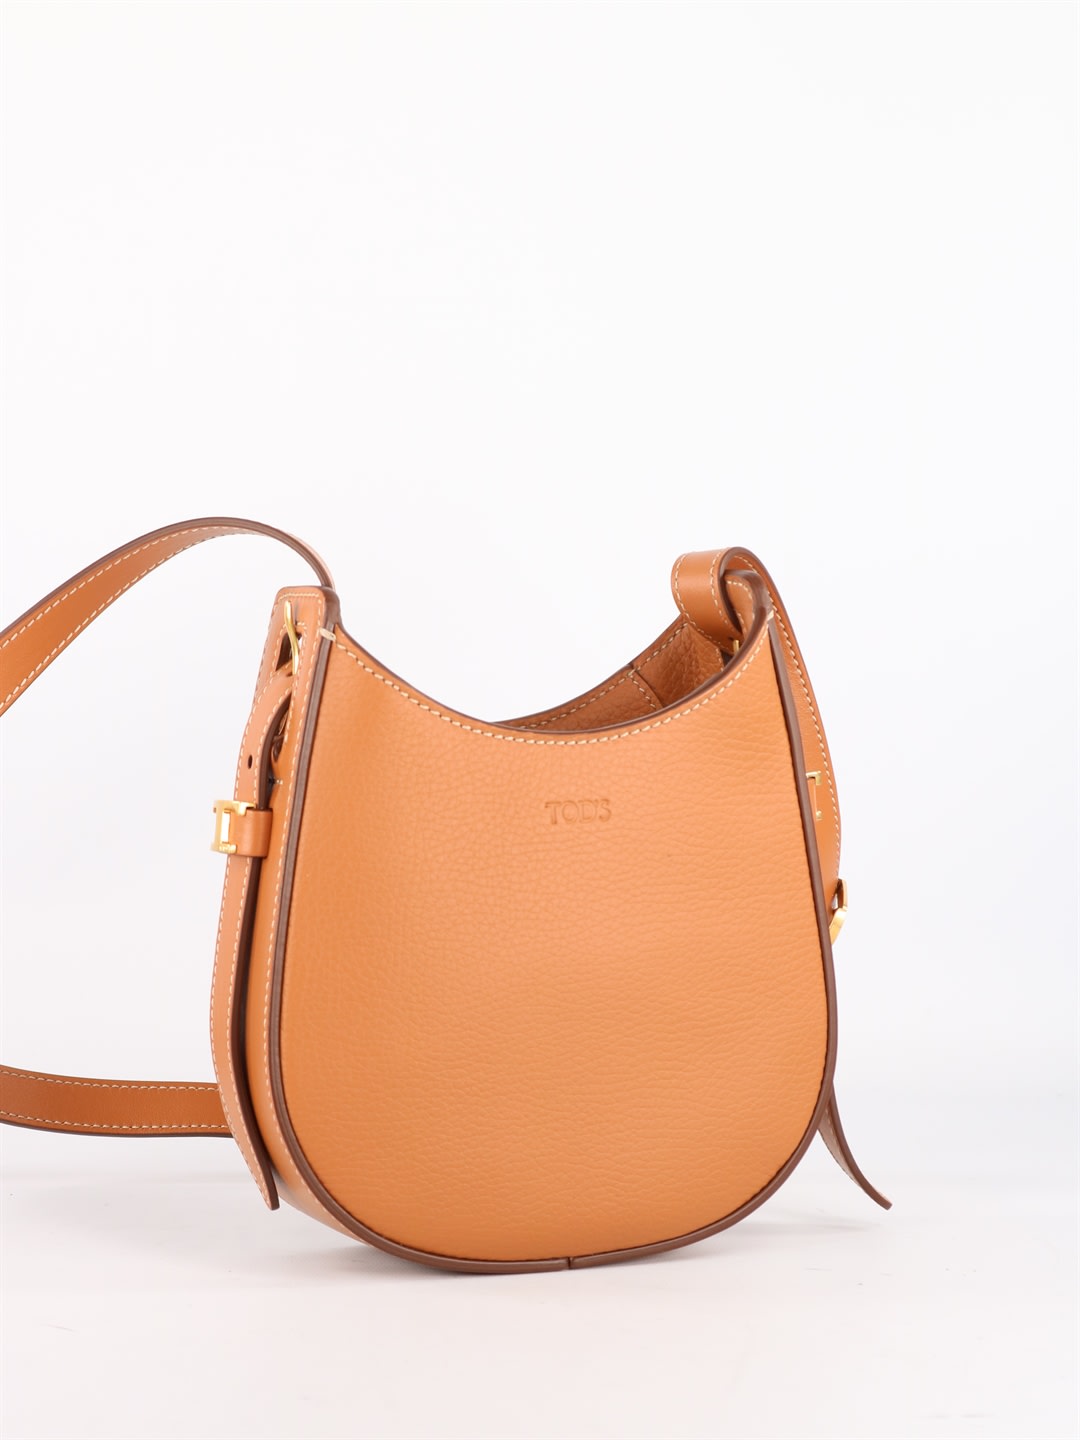 Tods Micro Leather Oboe Bag